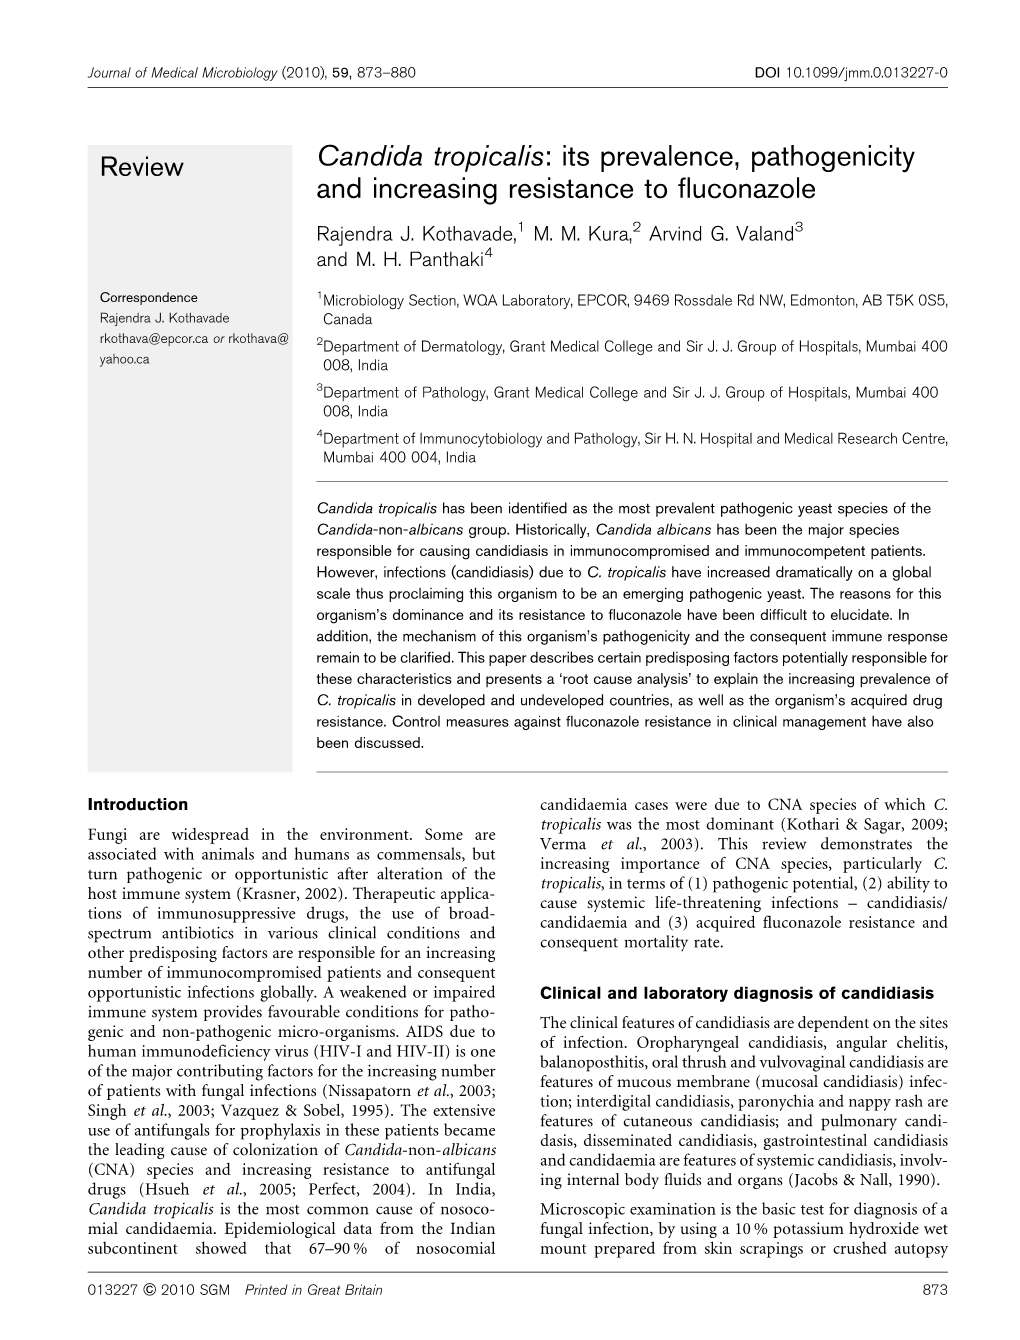 Candida Tropicalis: Its Prevalence, Pathogenicity and Increasing Resistance to Fluconazole